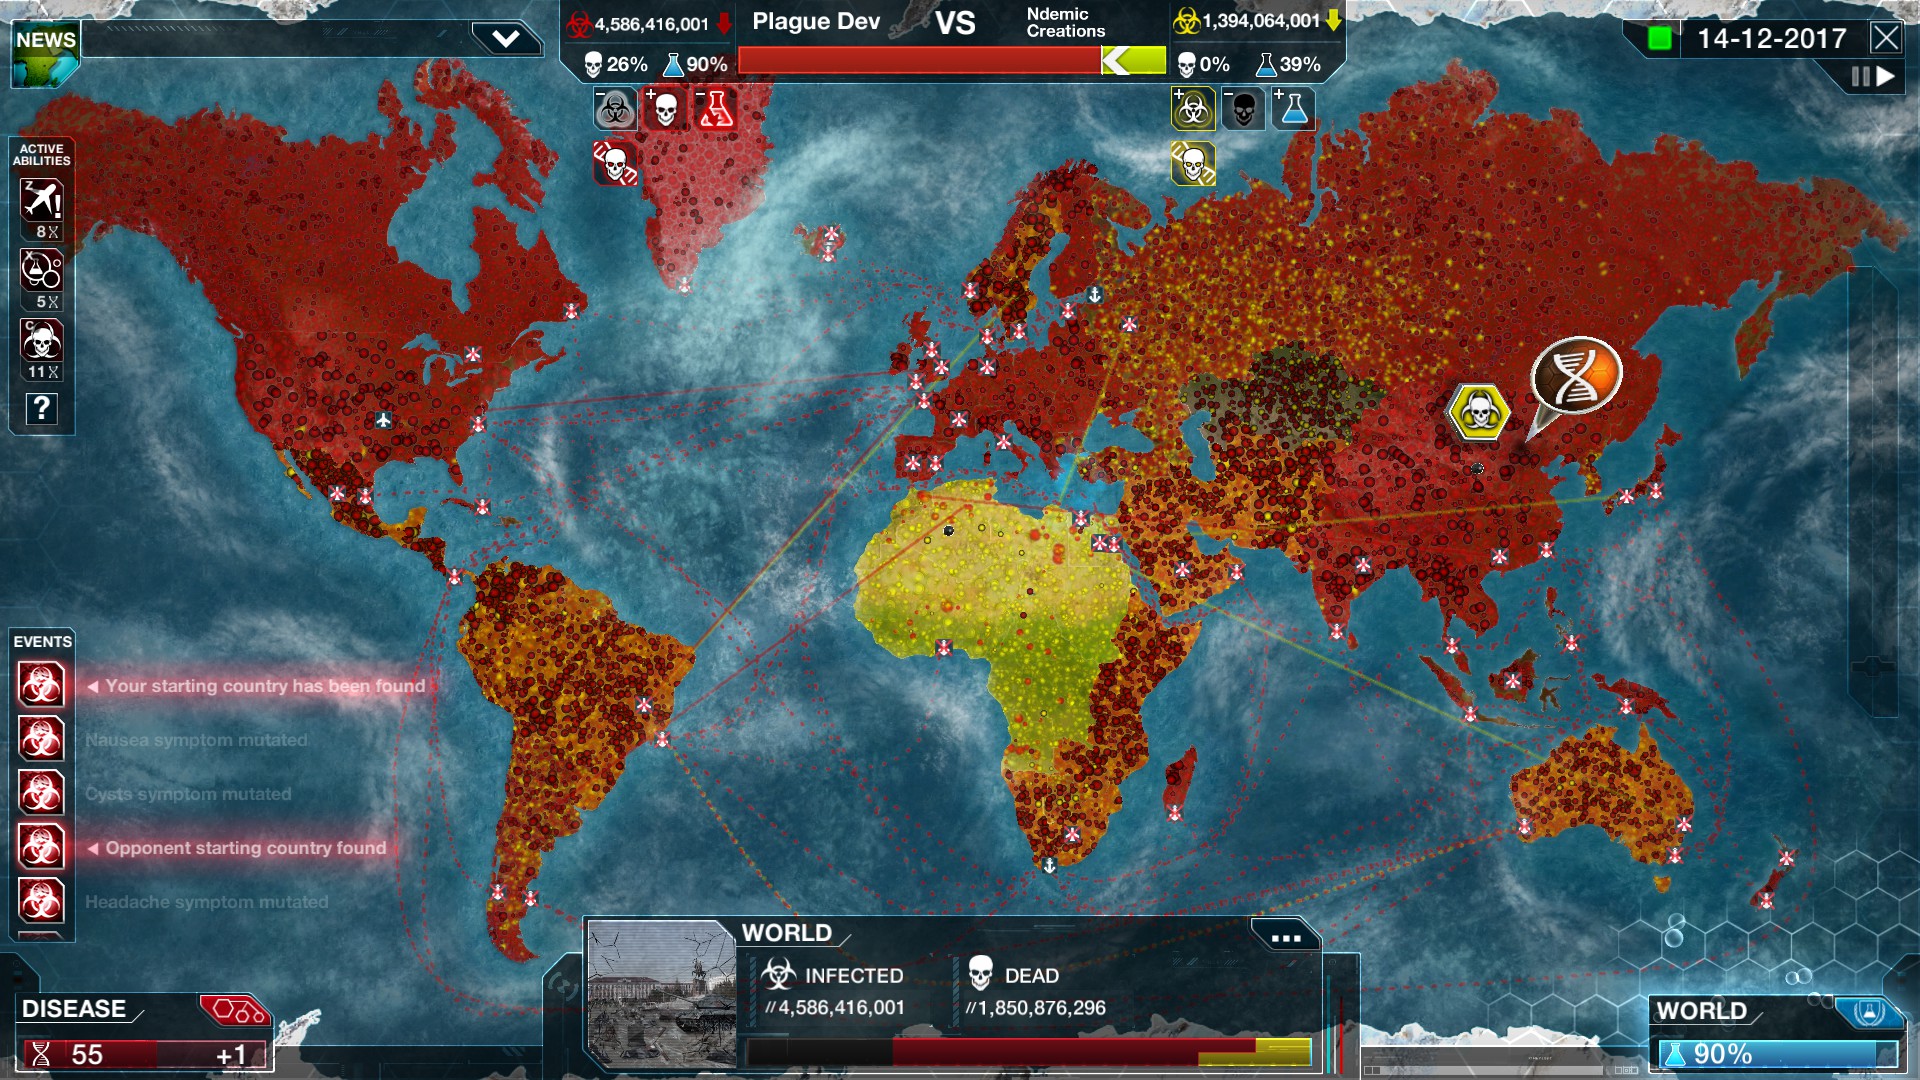 Coronavirus outbreak makes search for Plague Inc. game shoot in app stores